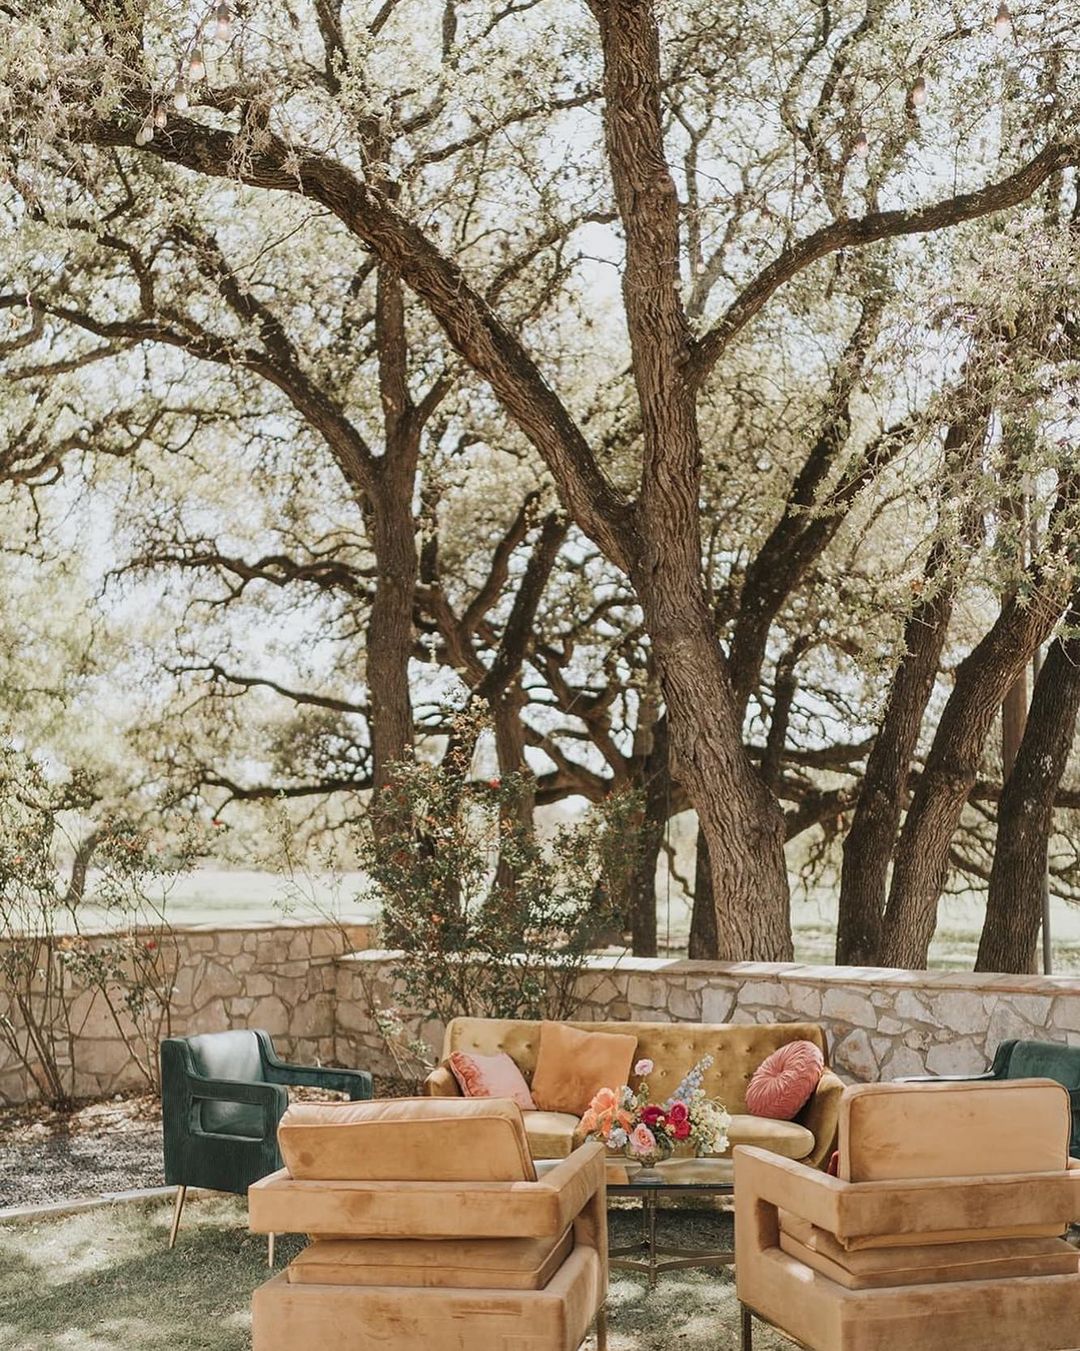 wedding venues in austin outdoor relax zone